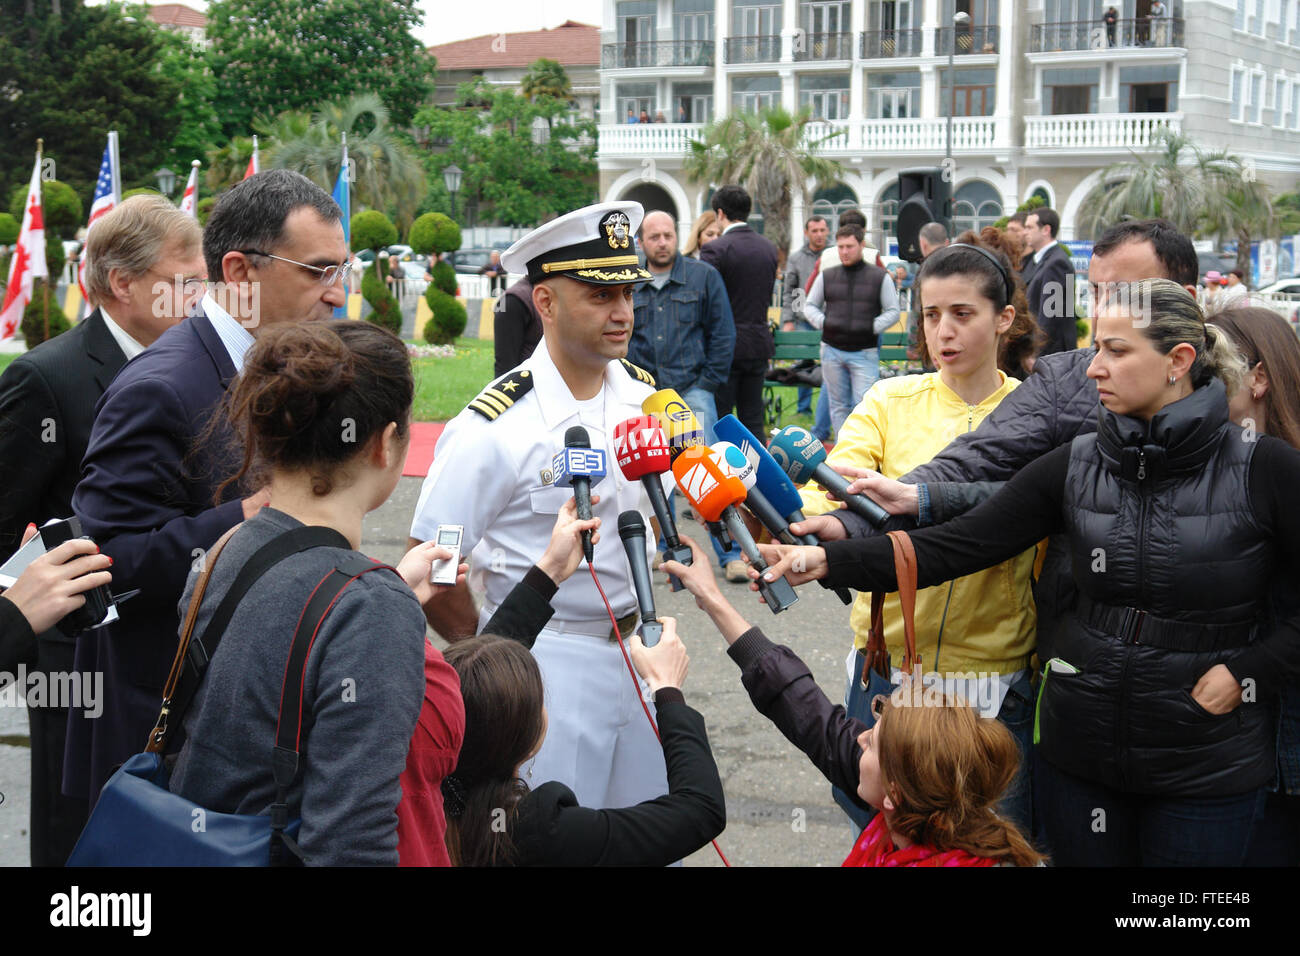 140508-N-ZZ999-007 BATUMI, Georgia (May 8, 2014) – Commanding officer of guided-missile frigate USS Taylor (FFG 50), Cmdr. Murz Morris, answers questions from local media after the ship’s arrival in Batumi, Georgia. Taylor’s port visit to Georgia reaffirms the United States’ commitment to strengthening ties with NATO allies and partners like Georgia. Taylor, homeported in Mayport, Fl., is deployed in a multi-mission role in the U.S. 6th Fleet area of operations to contribute to regional maritime security and to support NATO operations and deployments throughout the region. (U.S. Navy photo Lt. Stock Photo